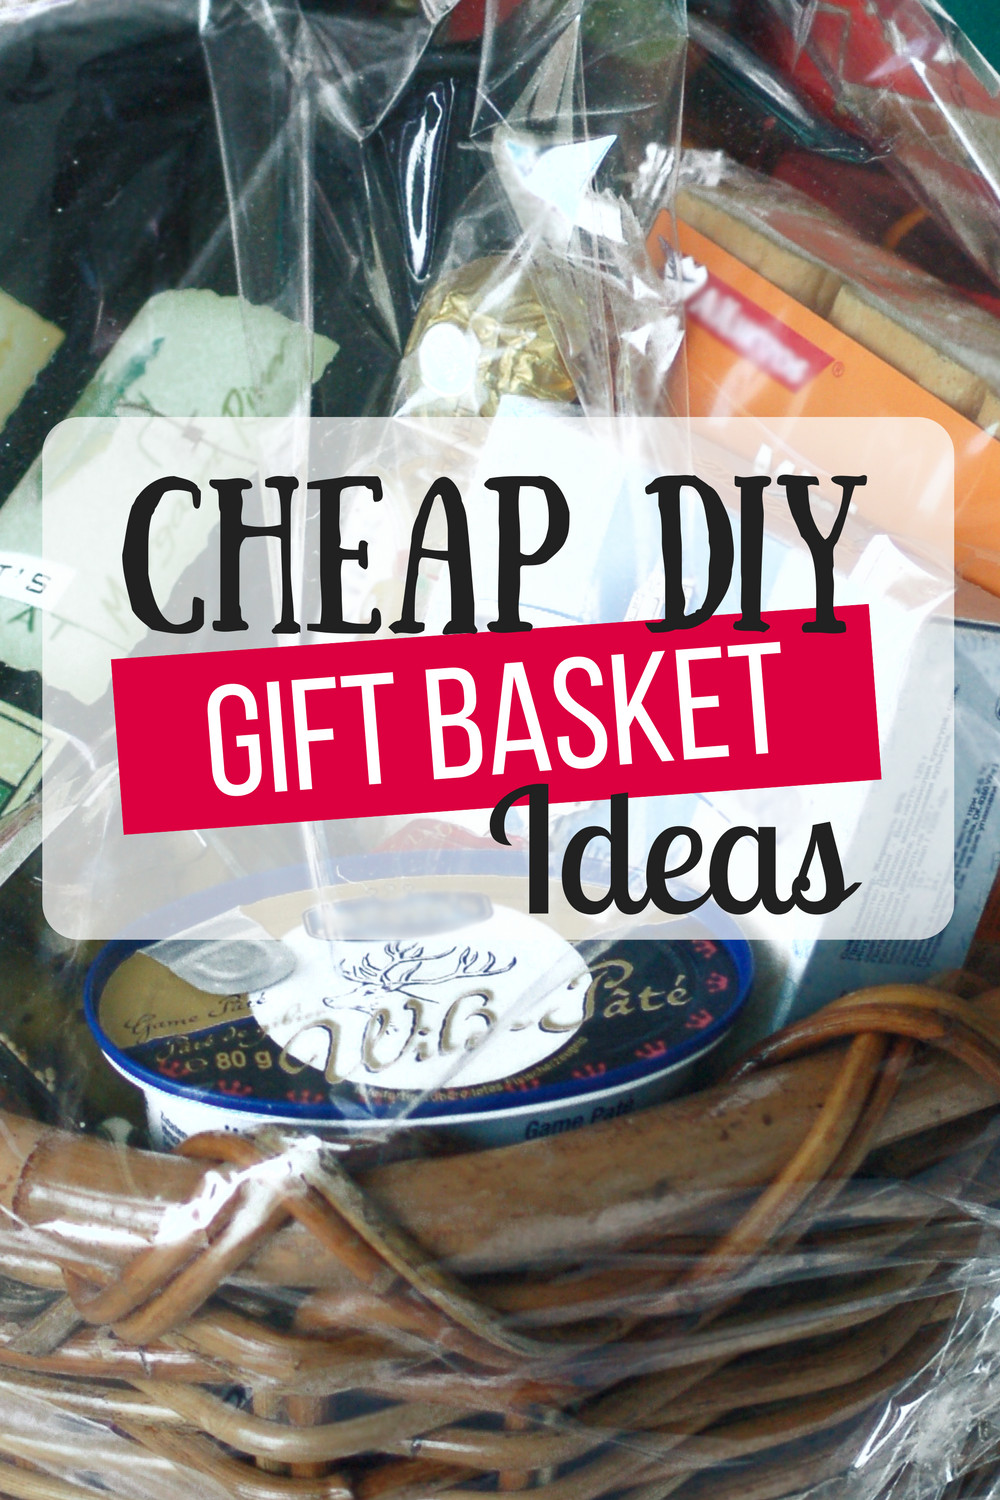 DIY Gift Baskets Ideas For Christmas
 Cheap DIY Gift Baskets The Busy Bud er